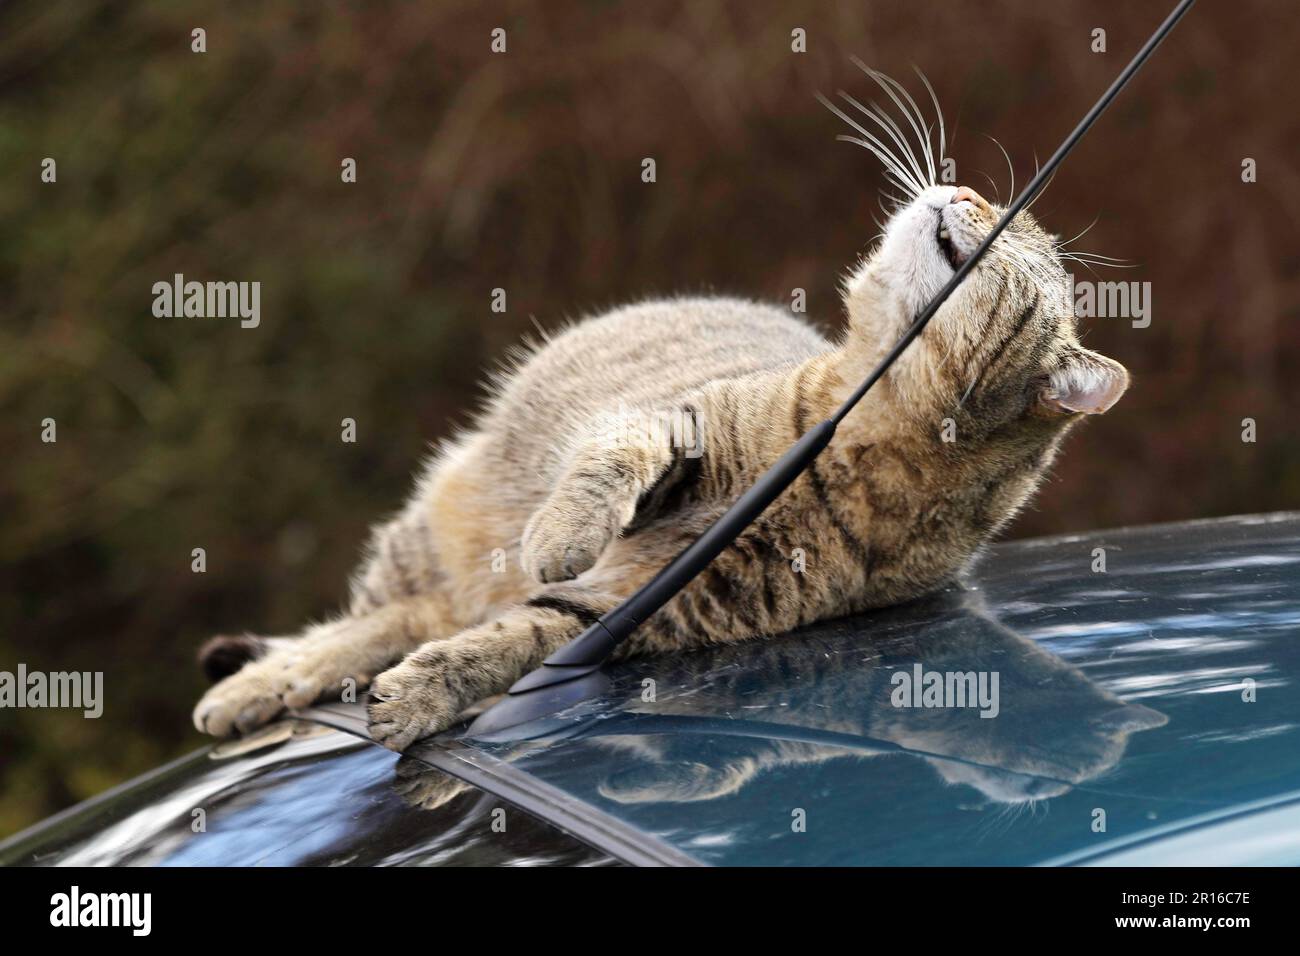 House cat on car roof, Germany Stock Photo